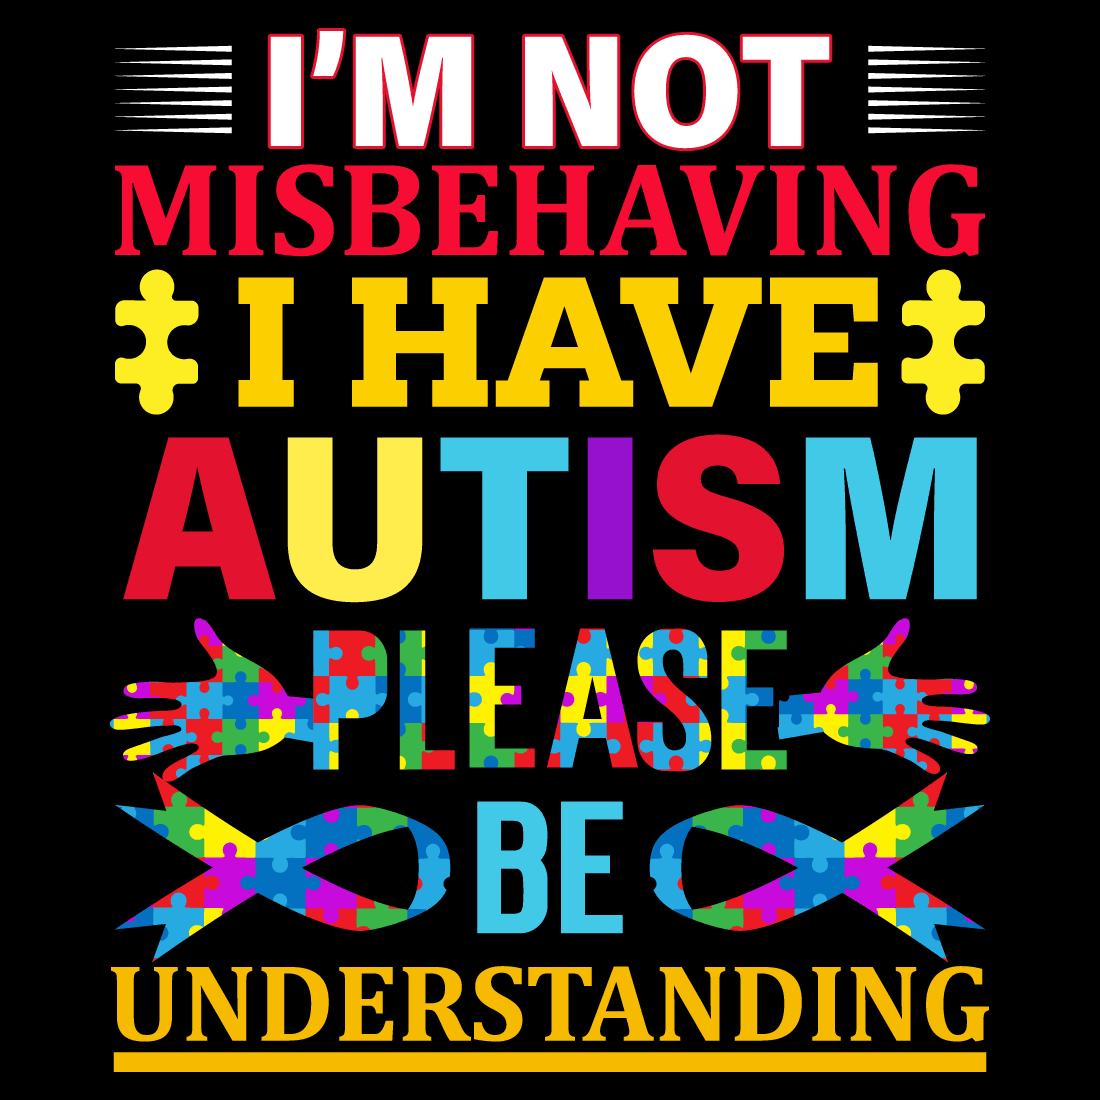 Poster that says i'm not misbehaving i have autism please.